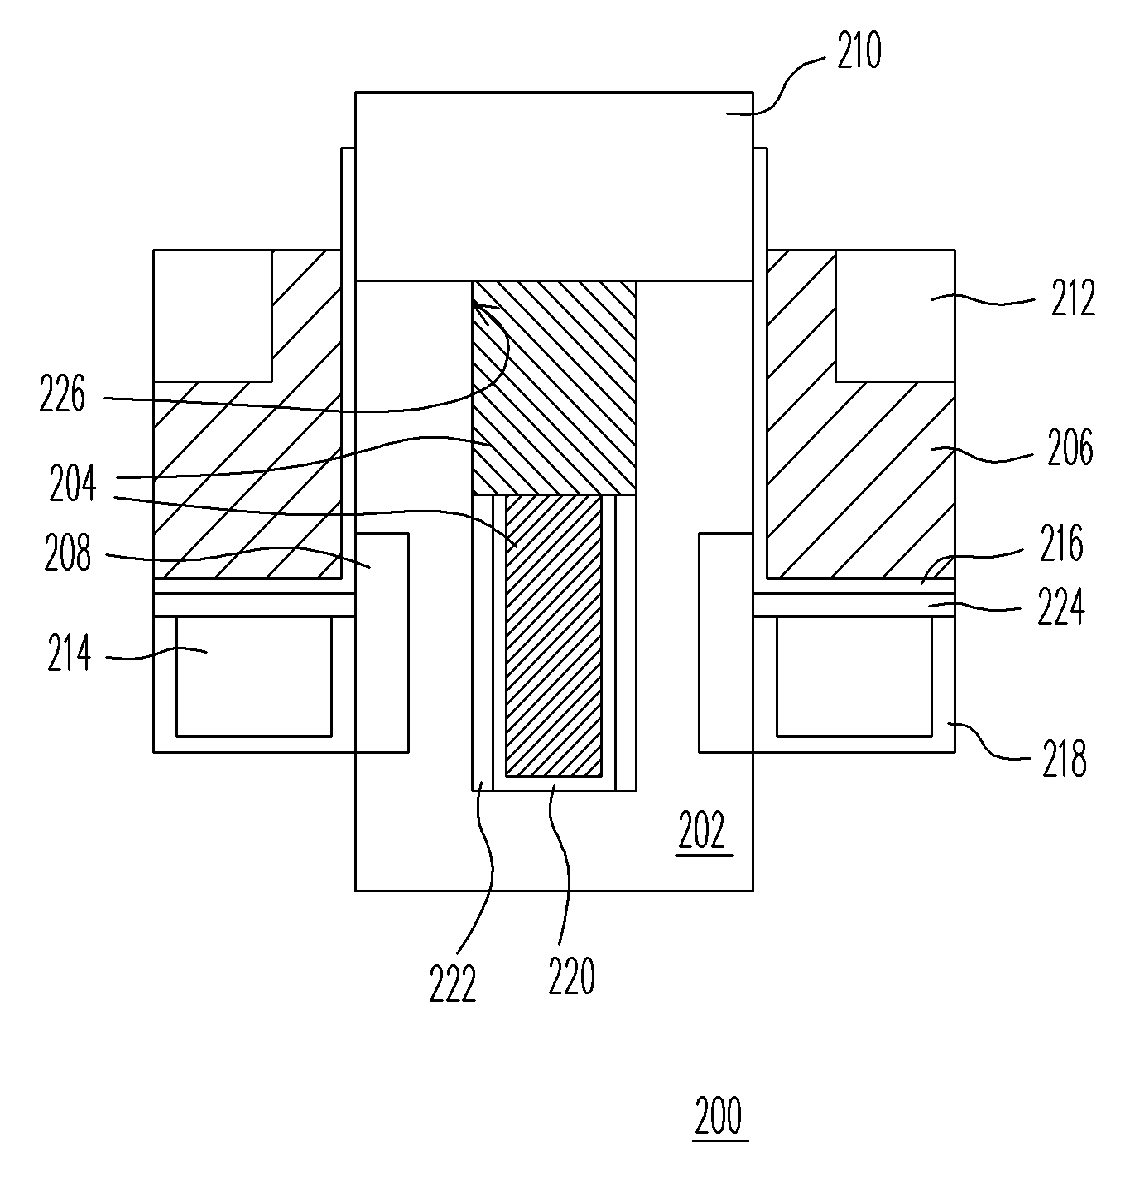 Vertical-type surrounding gate semiconductor device